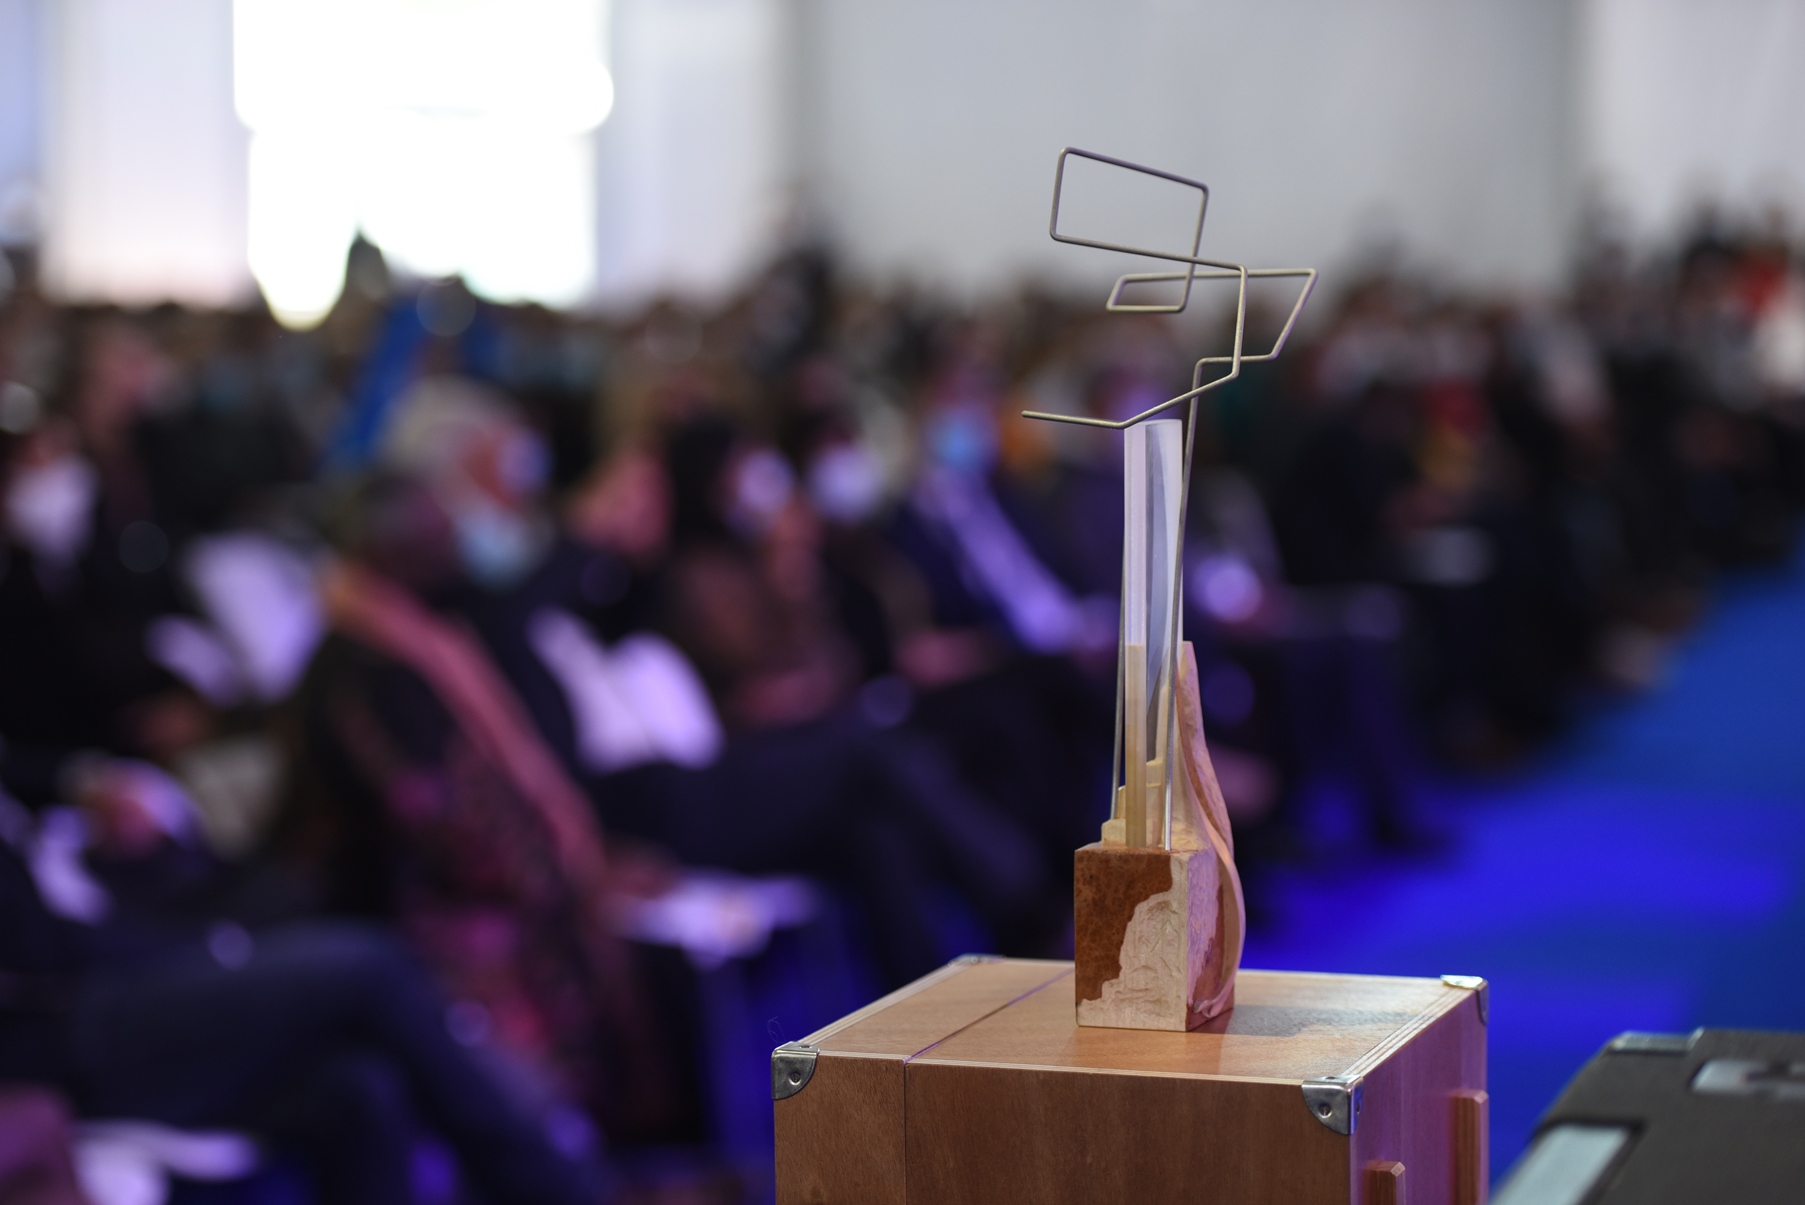 The 2020 Freedom Prize trophy was designed by students from the Lycée Napoléon de L’Aigle, in Normandy.